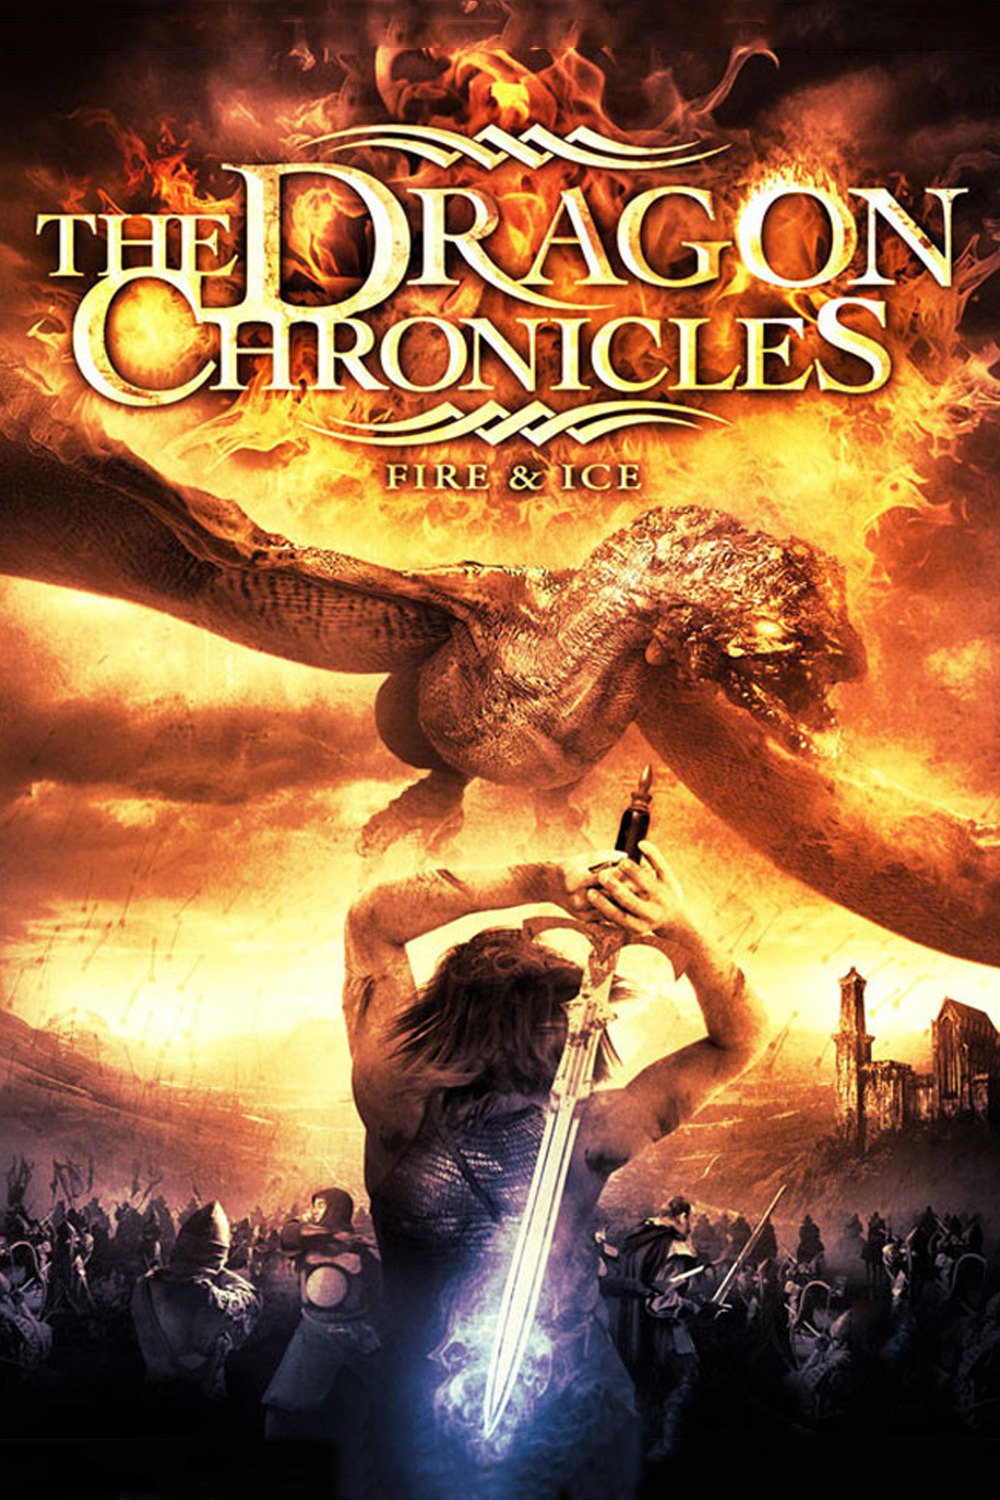 Poster for the movie "Fire and Ice: The Dragon Chronicles"